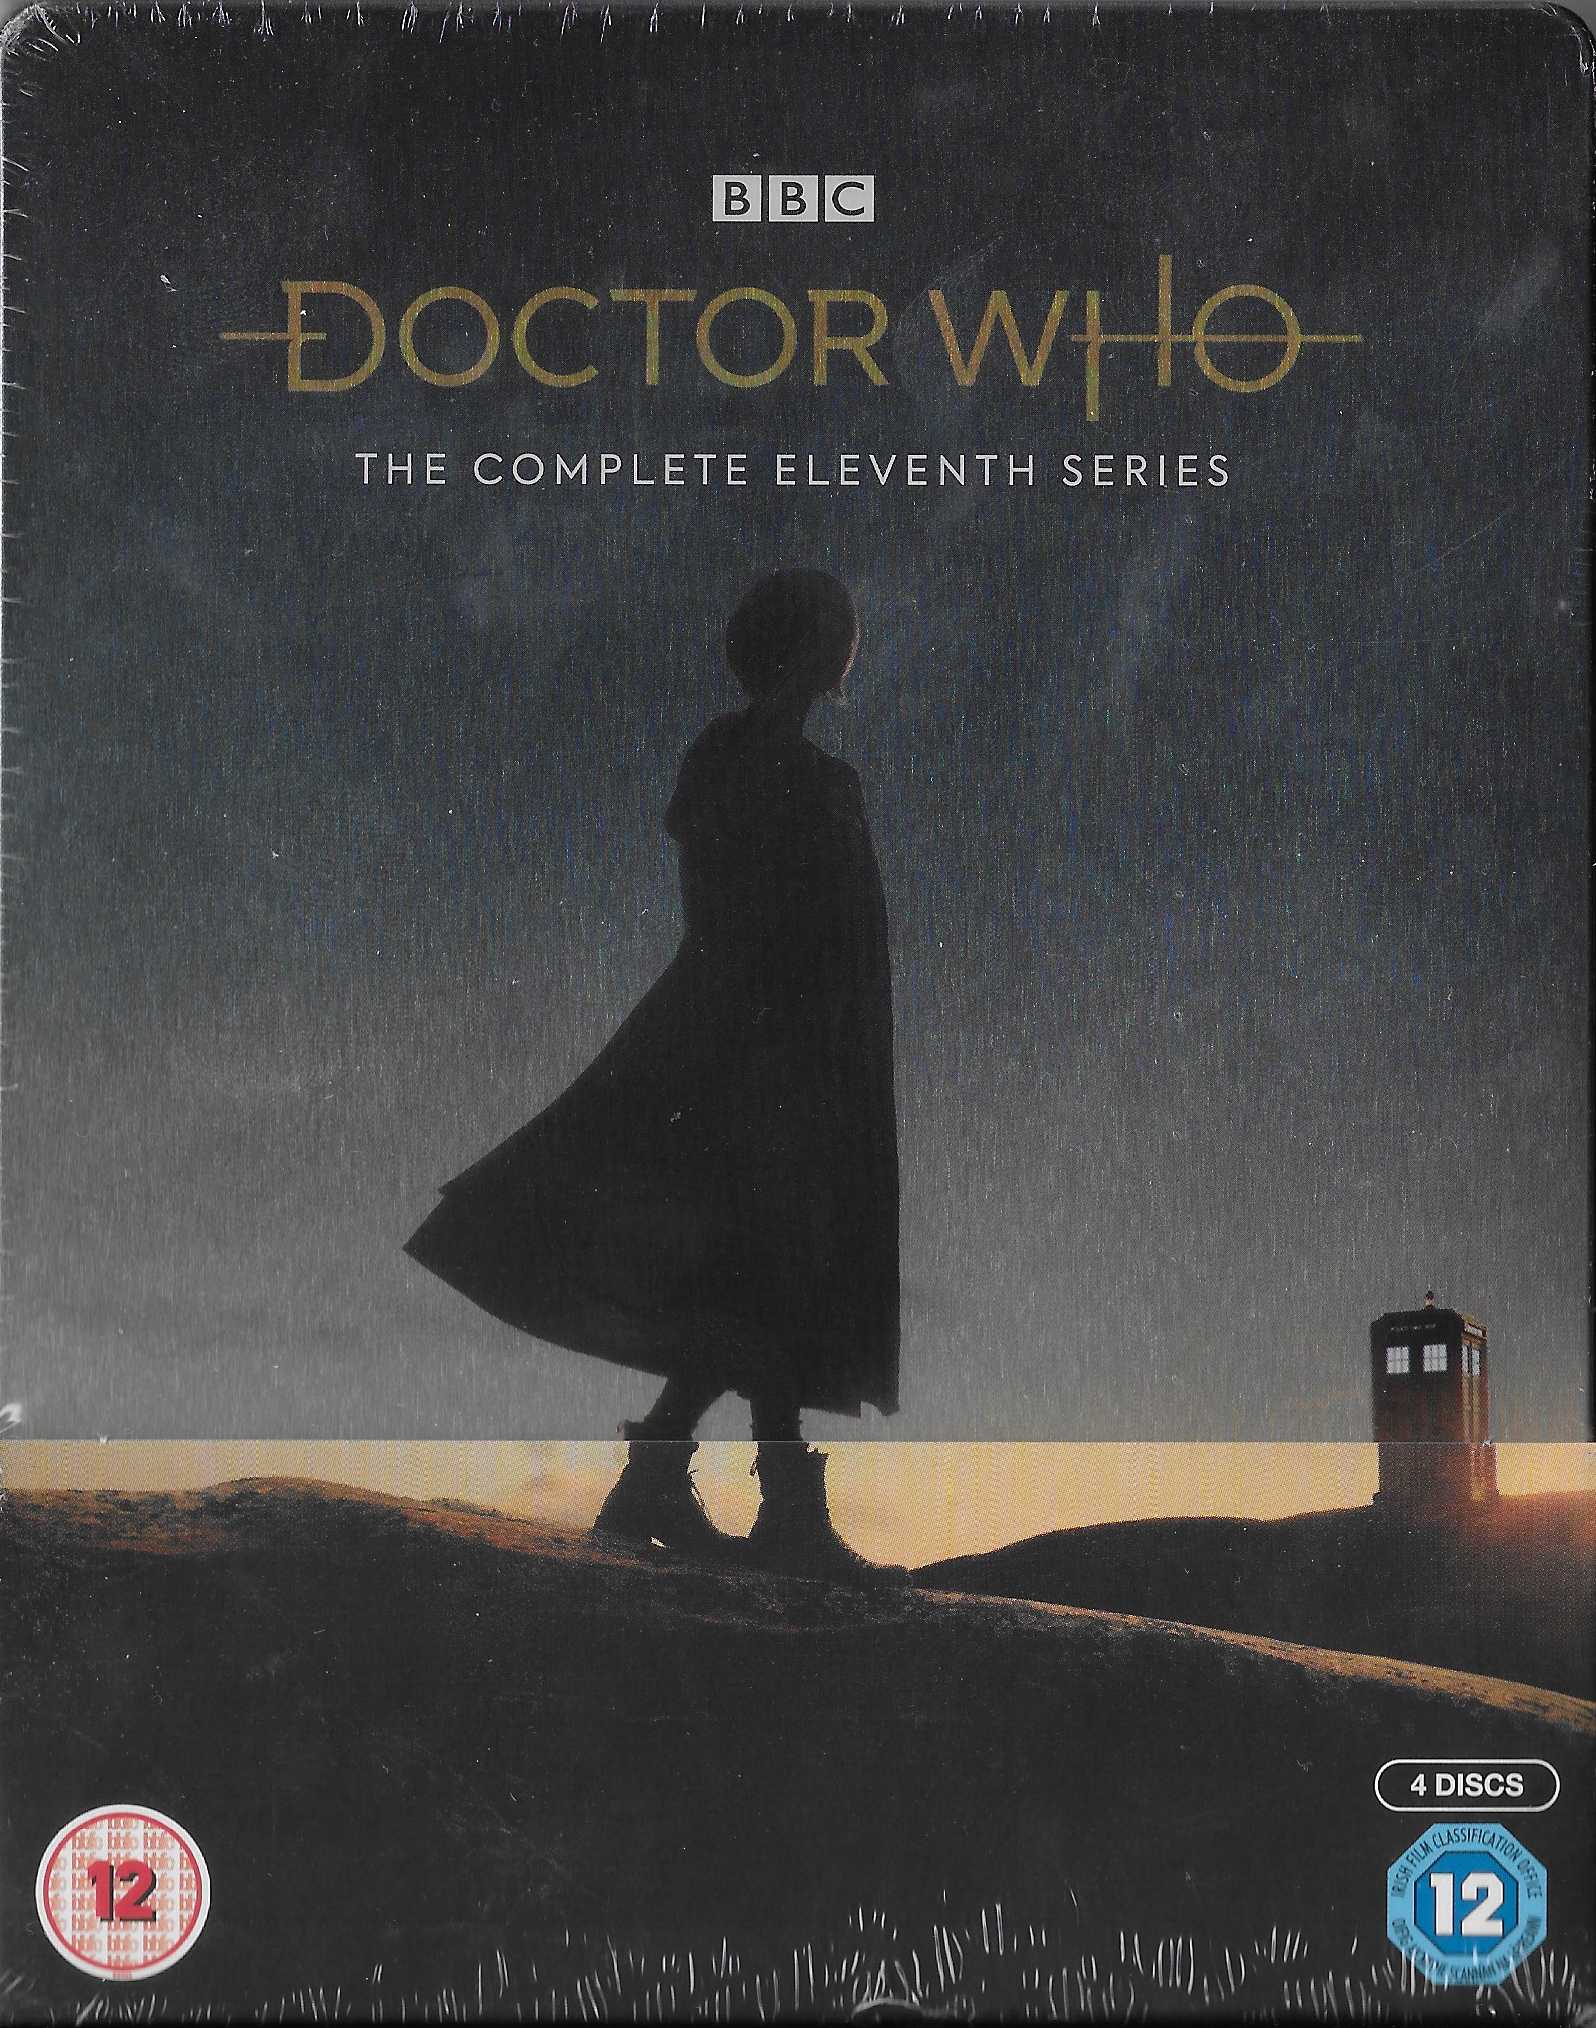 Picture of BBCBD 0455 Doctor Who - The complete series 11 by artist Various from the BBC records and Tapes library